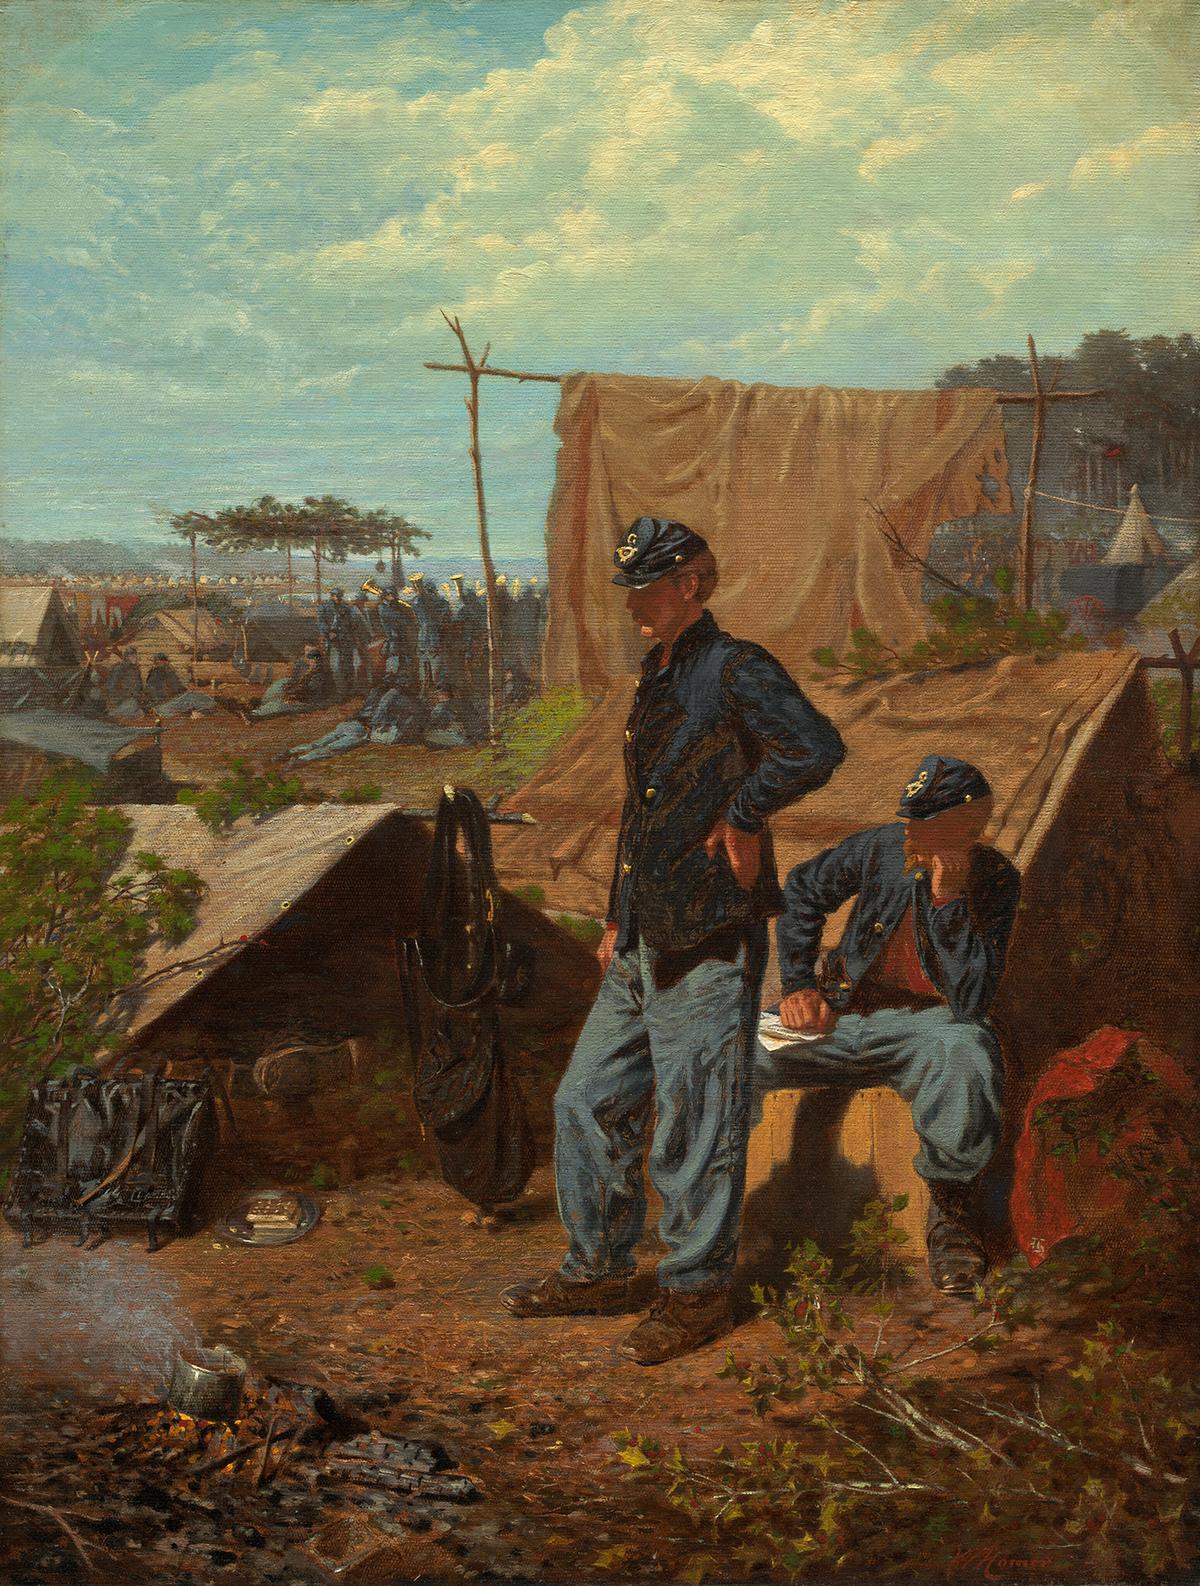 "Home, Sweet Home," circa 1863, by Winslow Homer. Oil on canvas; 21 1/2 inches by 16 1/2 inches. National Gallery of Art, Washington. (Public Domain)